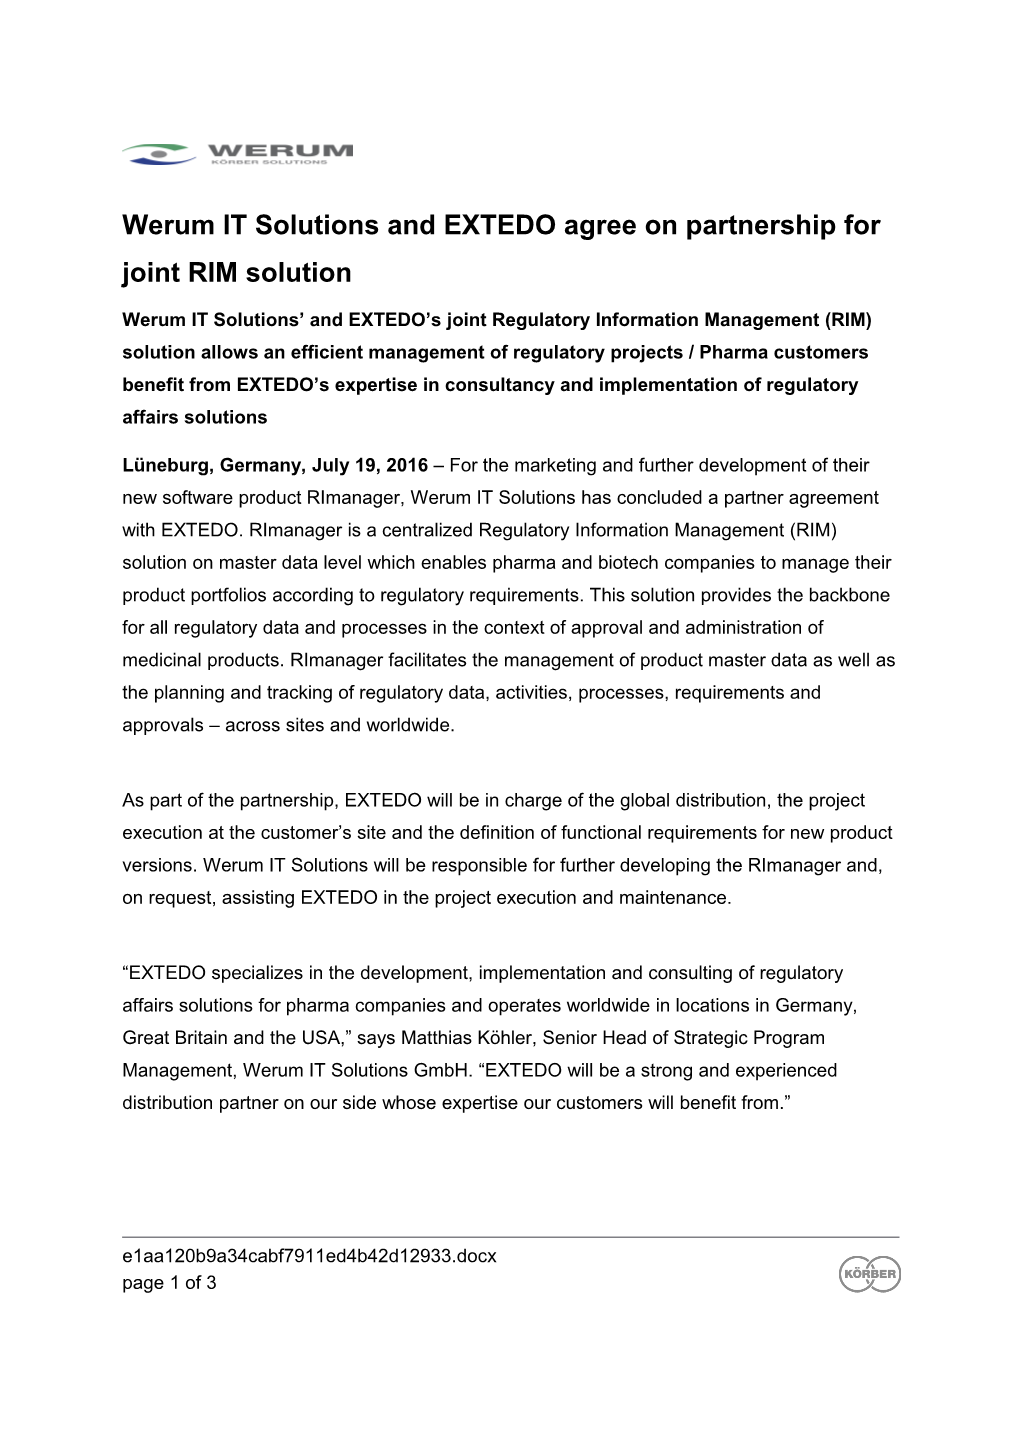 Werum IT Solutions and EXTEDO Agree on Partnership for Joint RIM Solution